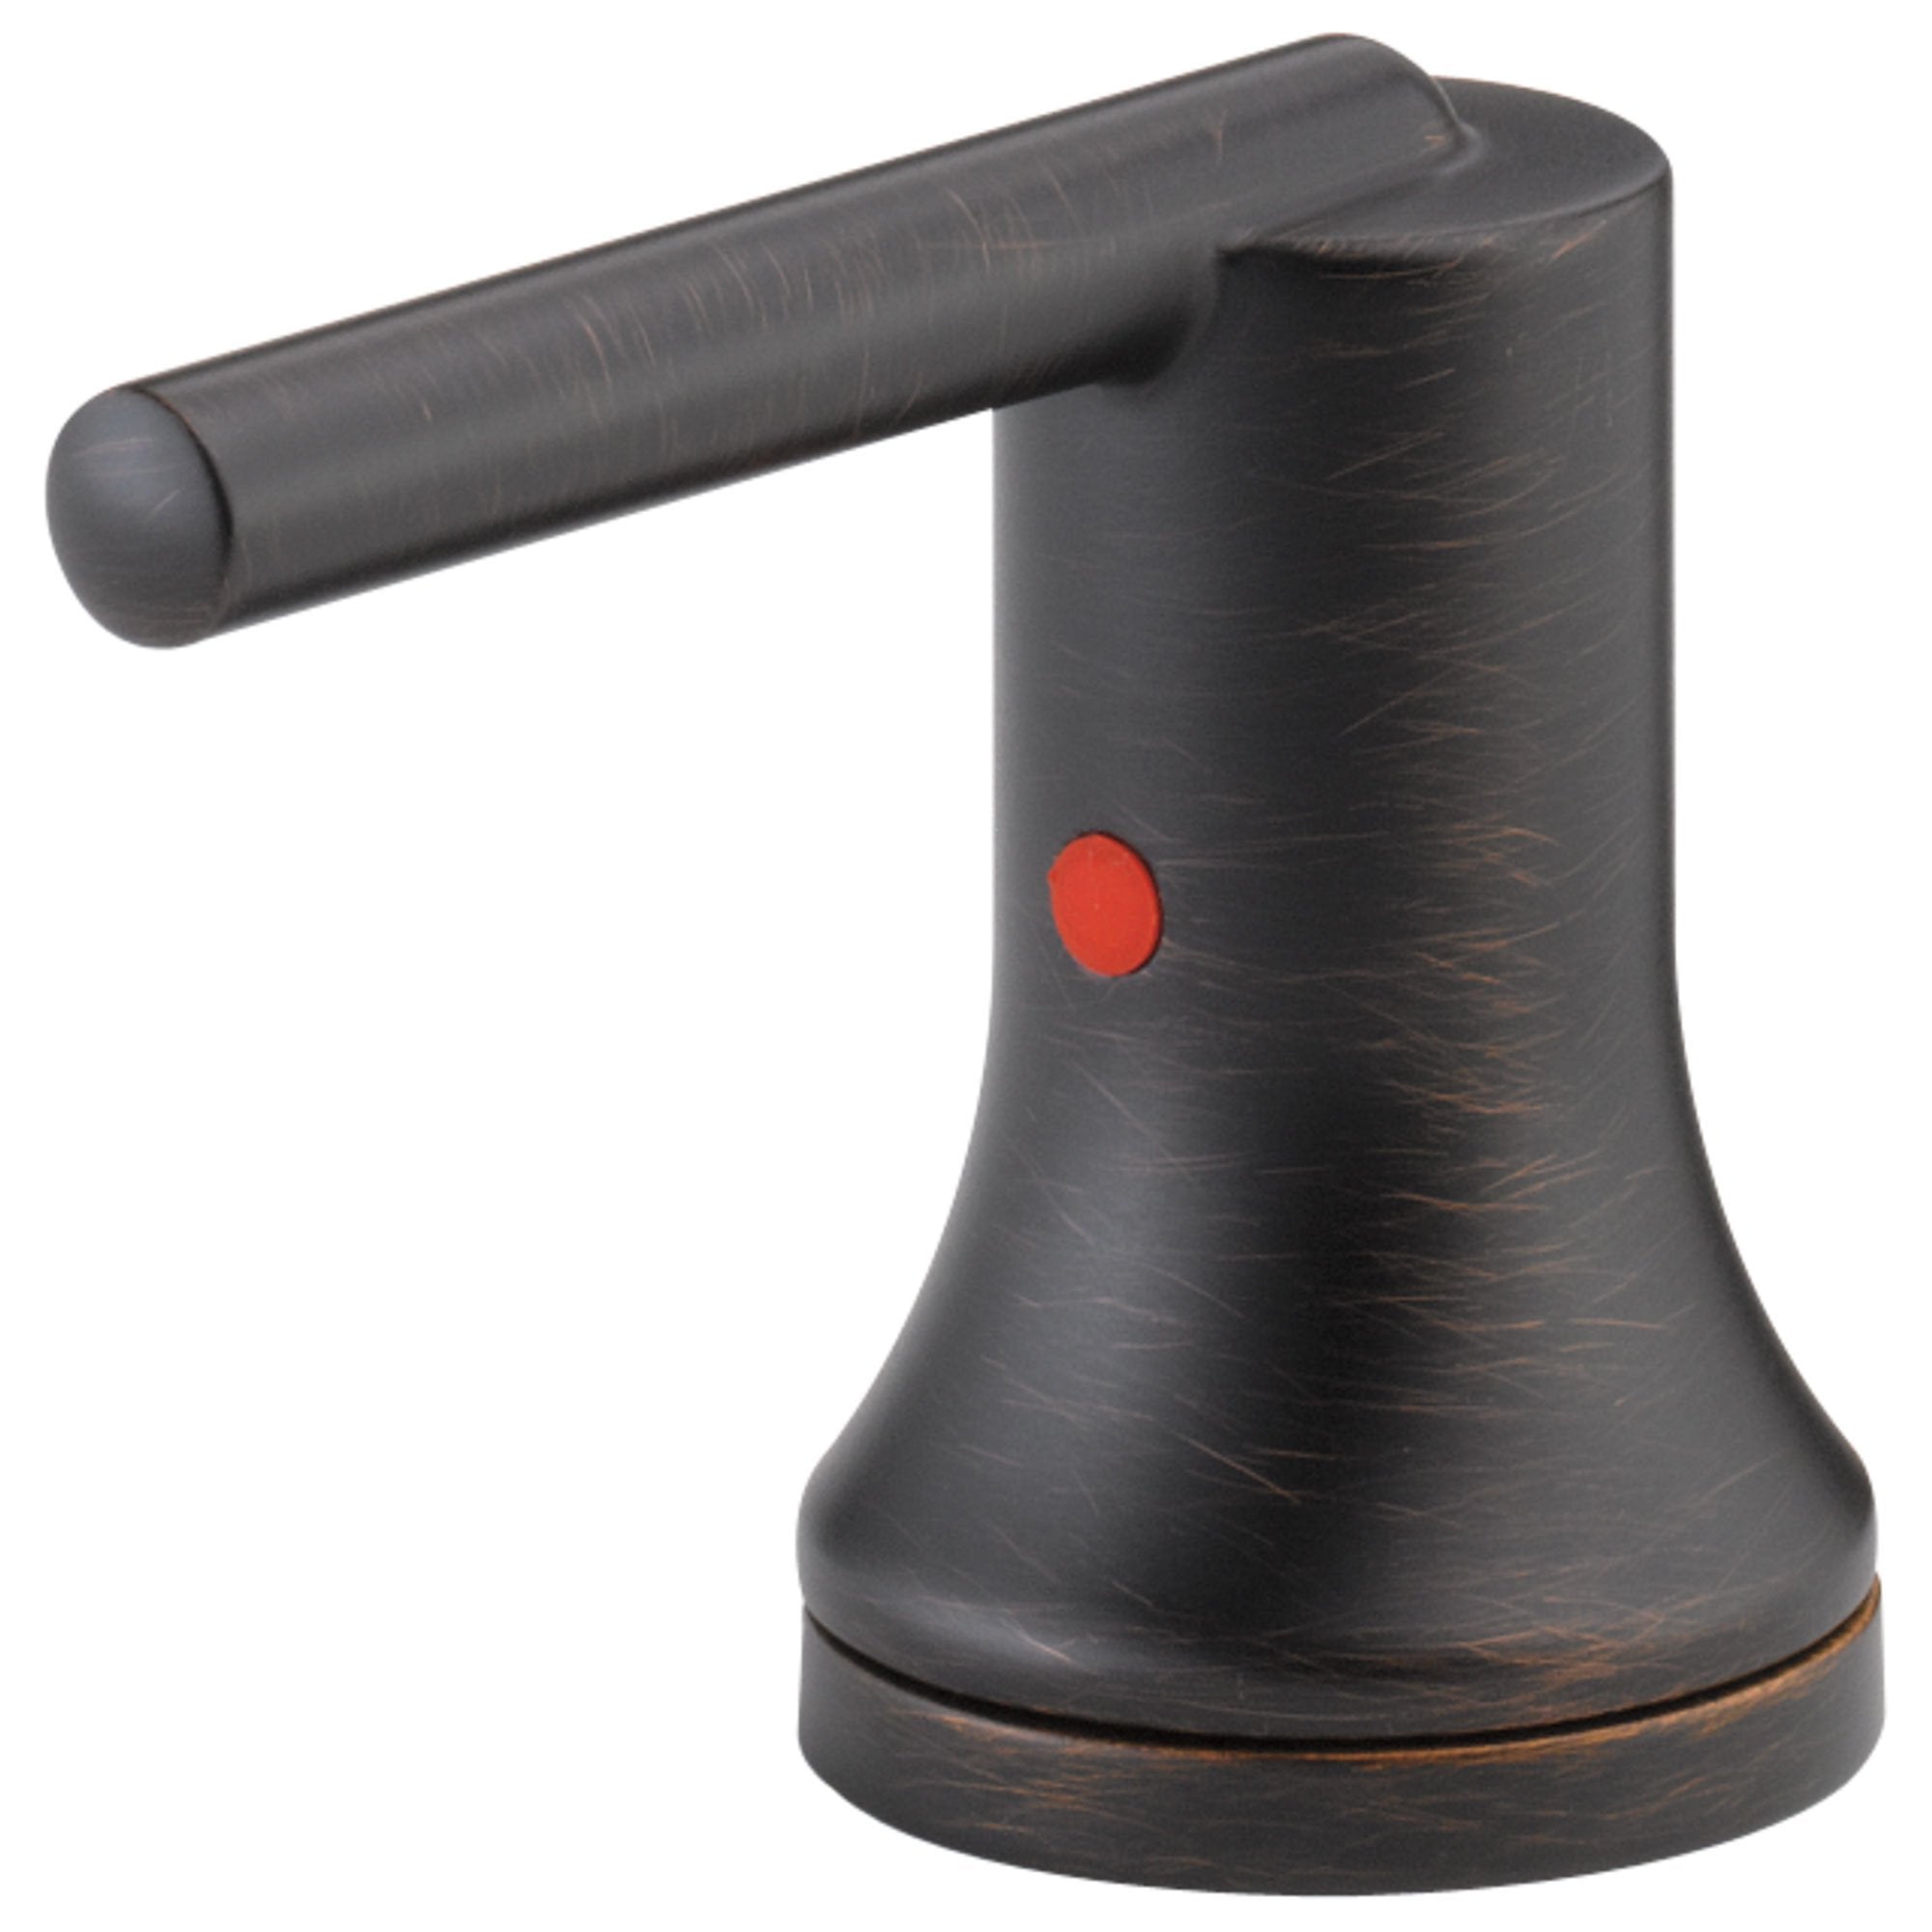 Delta Trinsic Collection Venetian Bronze Finish Lavatory Lever Handles - Quantity 2 Included DH259RB